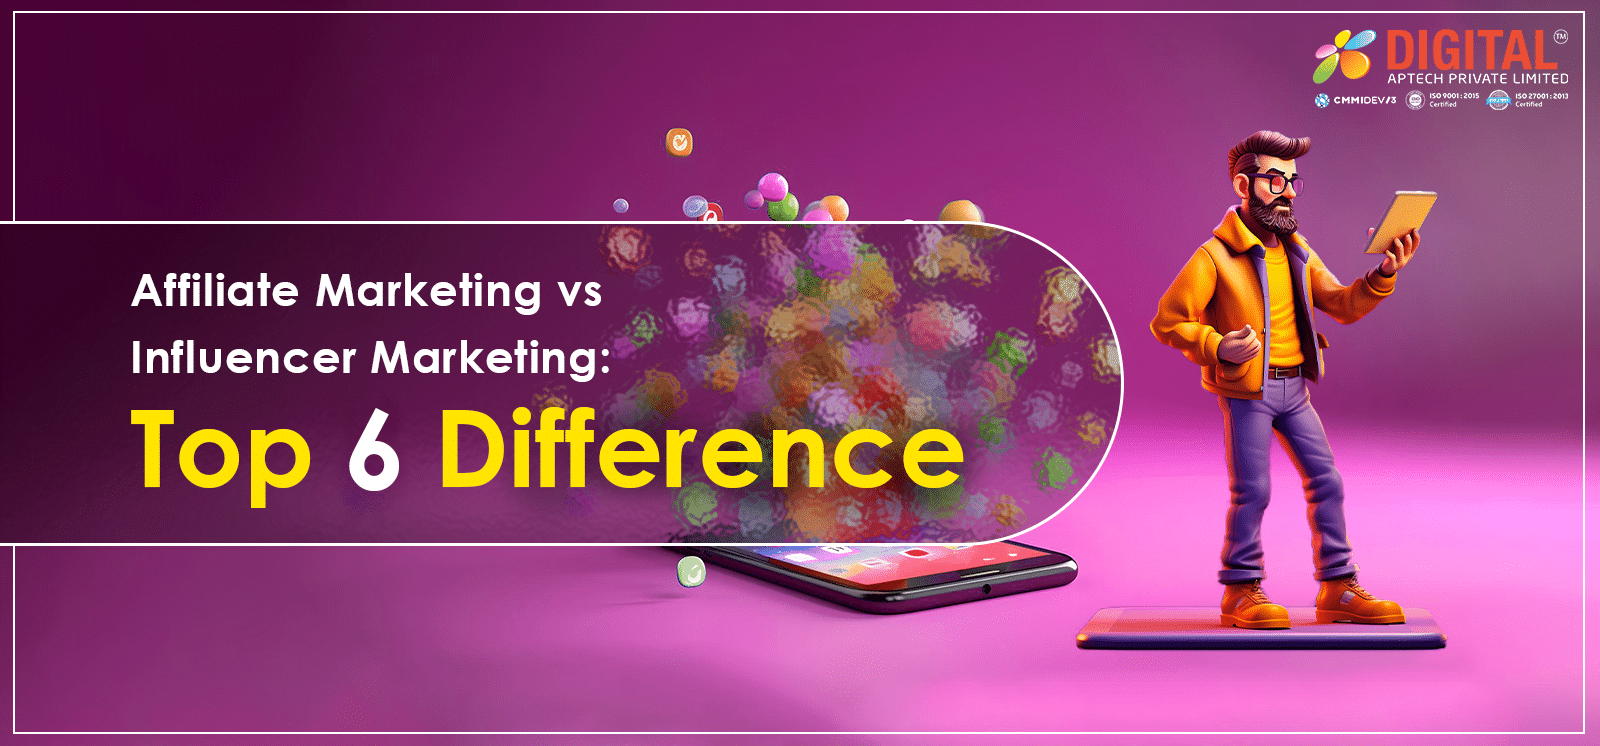 Affiliate Marketing vs Influencer Marketing: Top 6 Differences